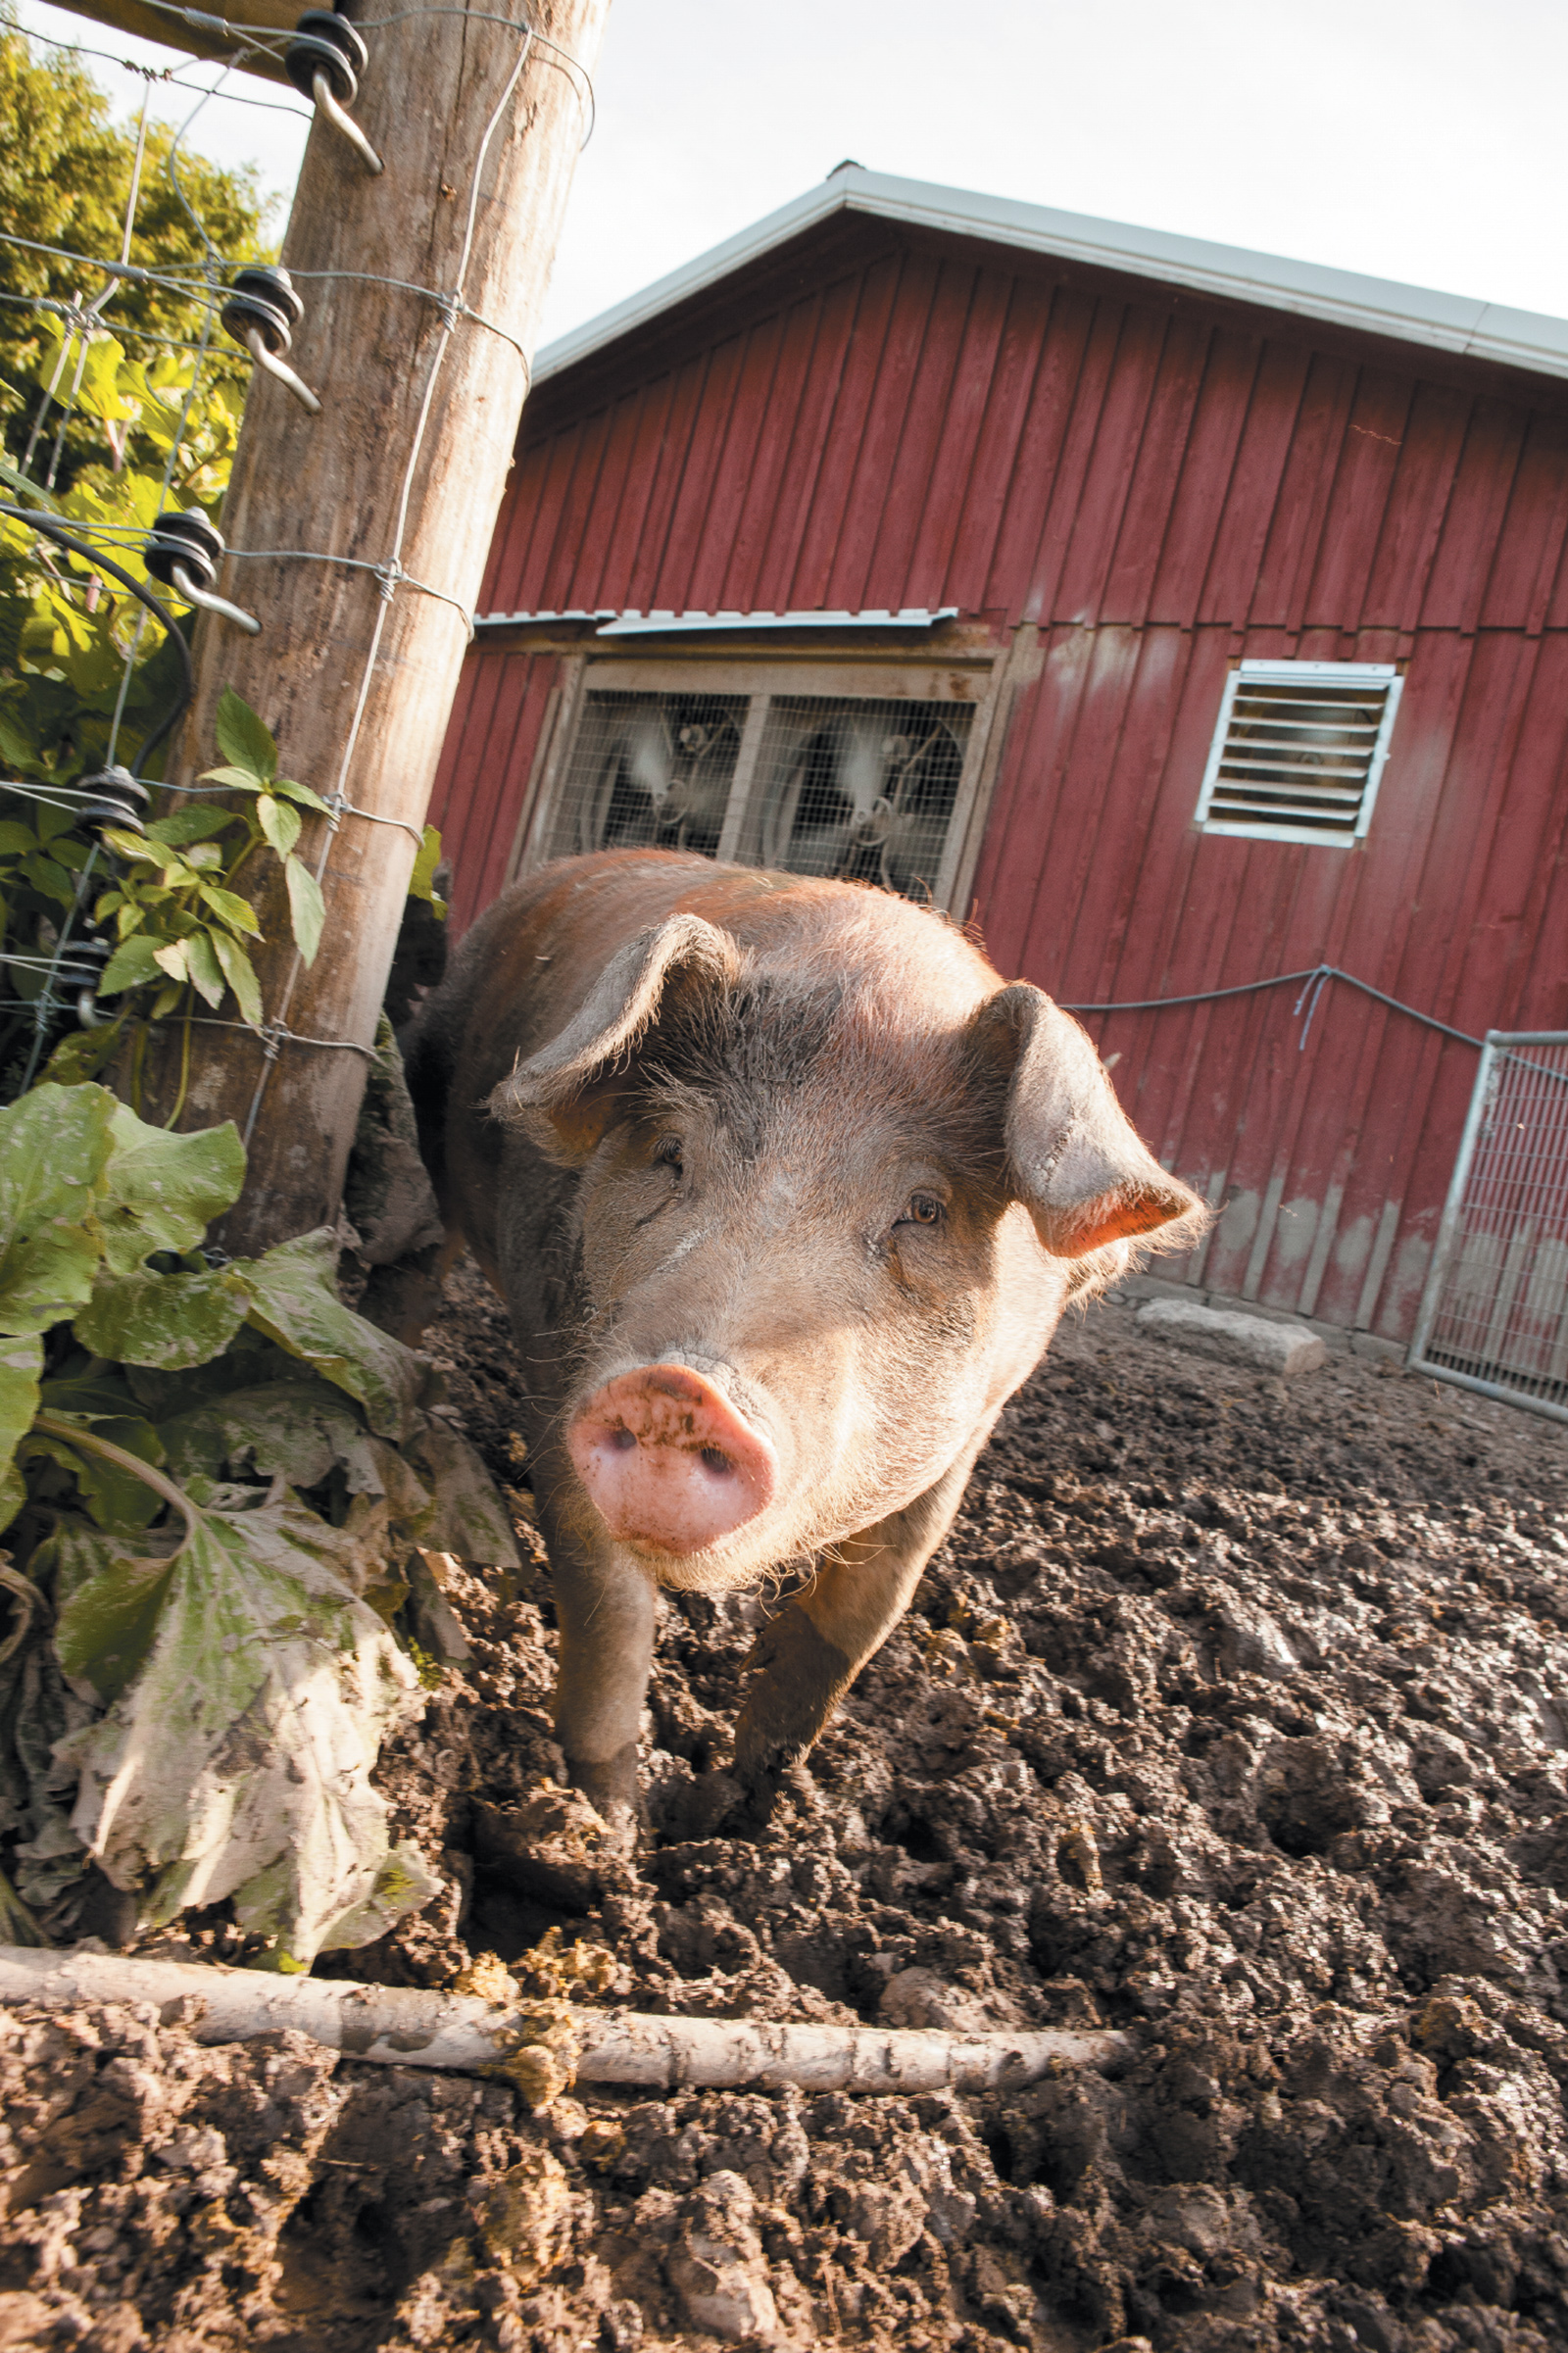 A young pig at J&D Farms, where the animals—raised for meat—roam in wooded lots and grassy paddocks, eating wild apples and foraging for tubers, Eaton, New York, June 2015